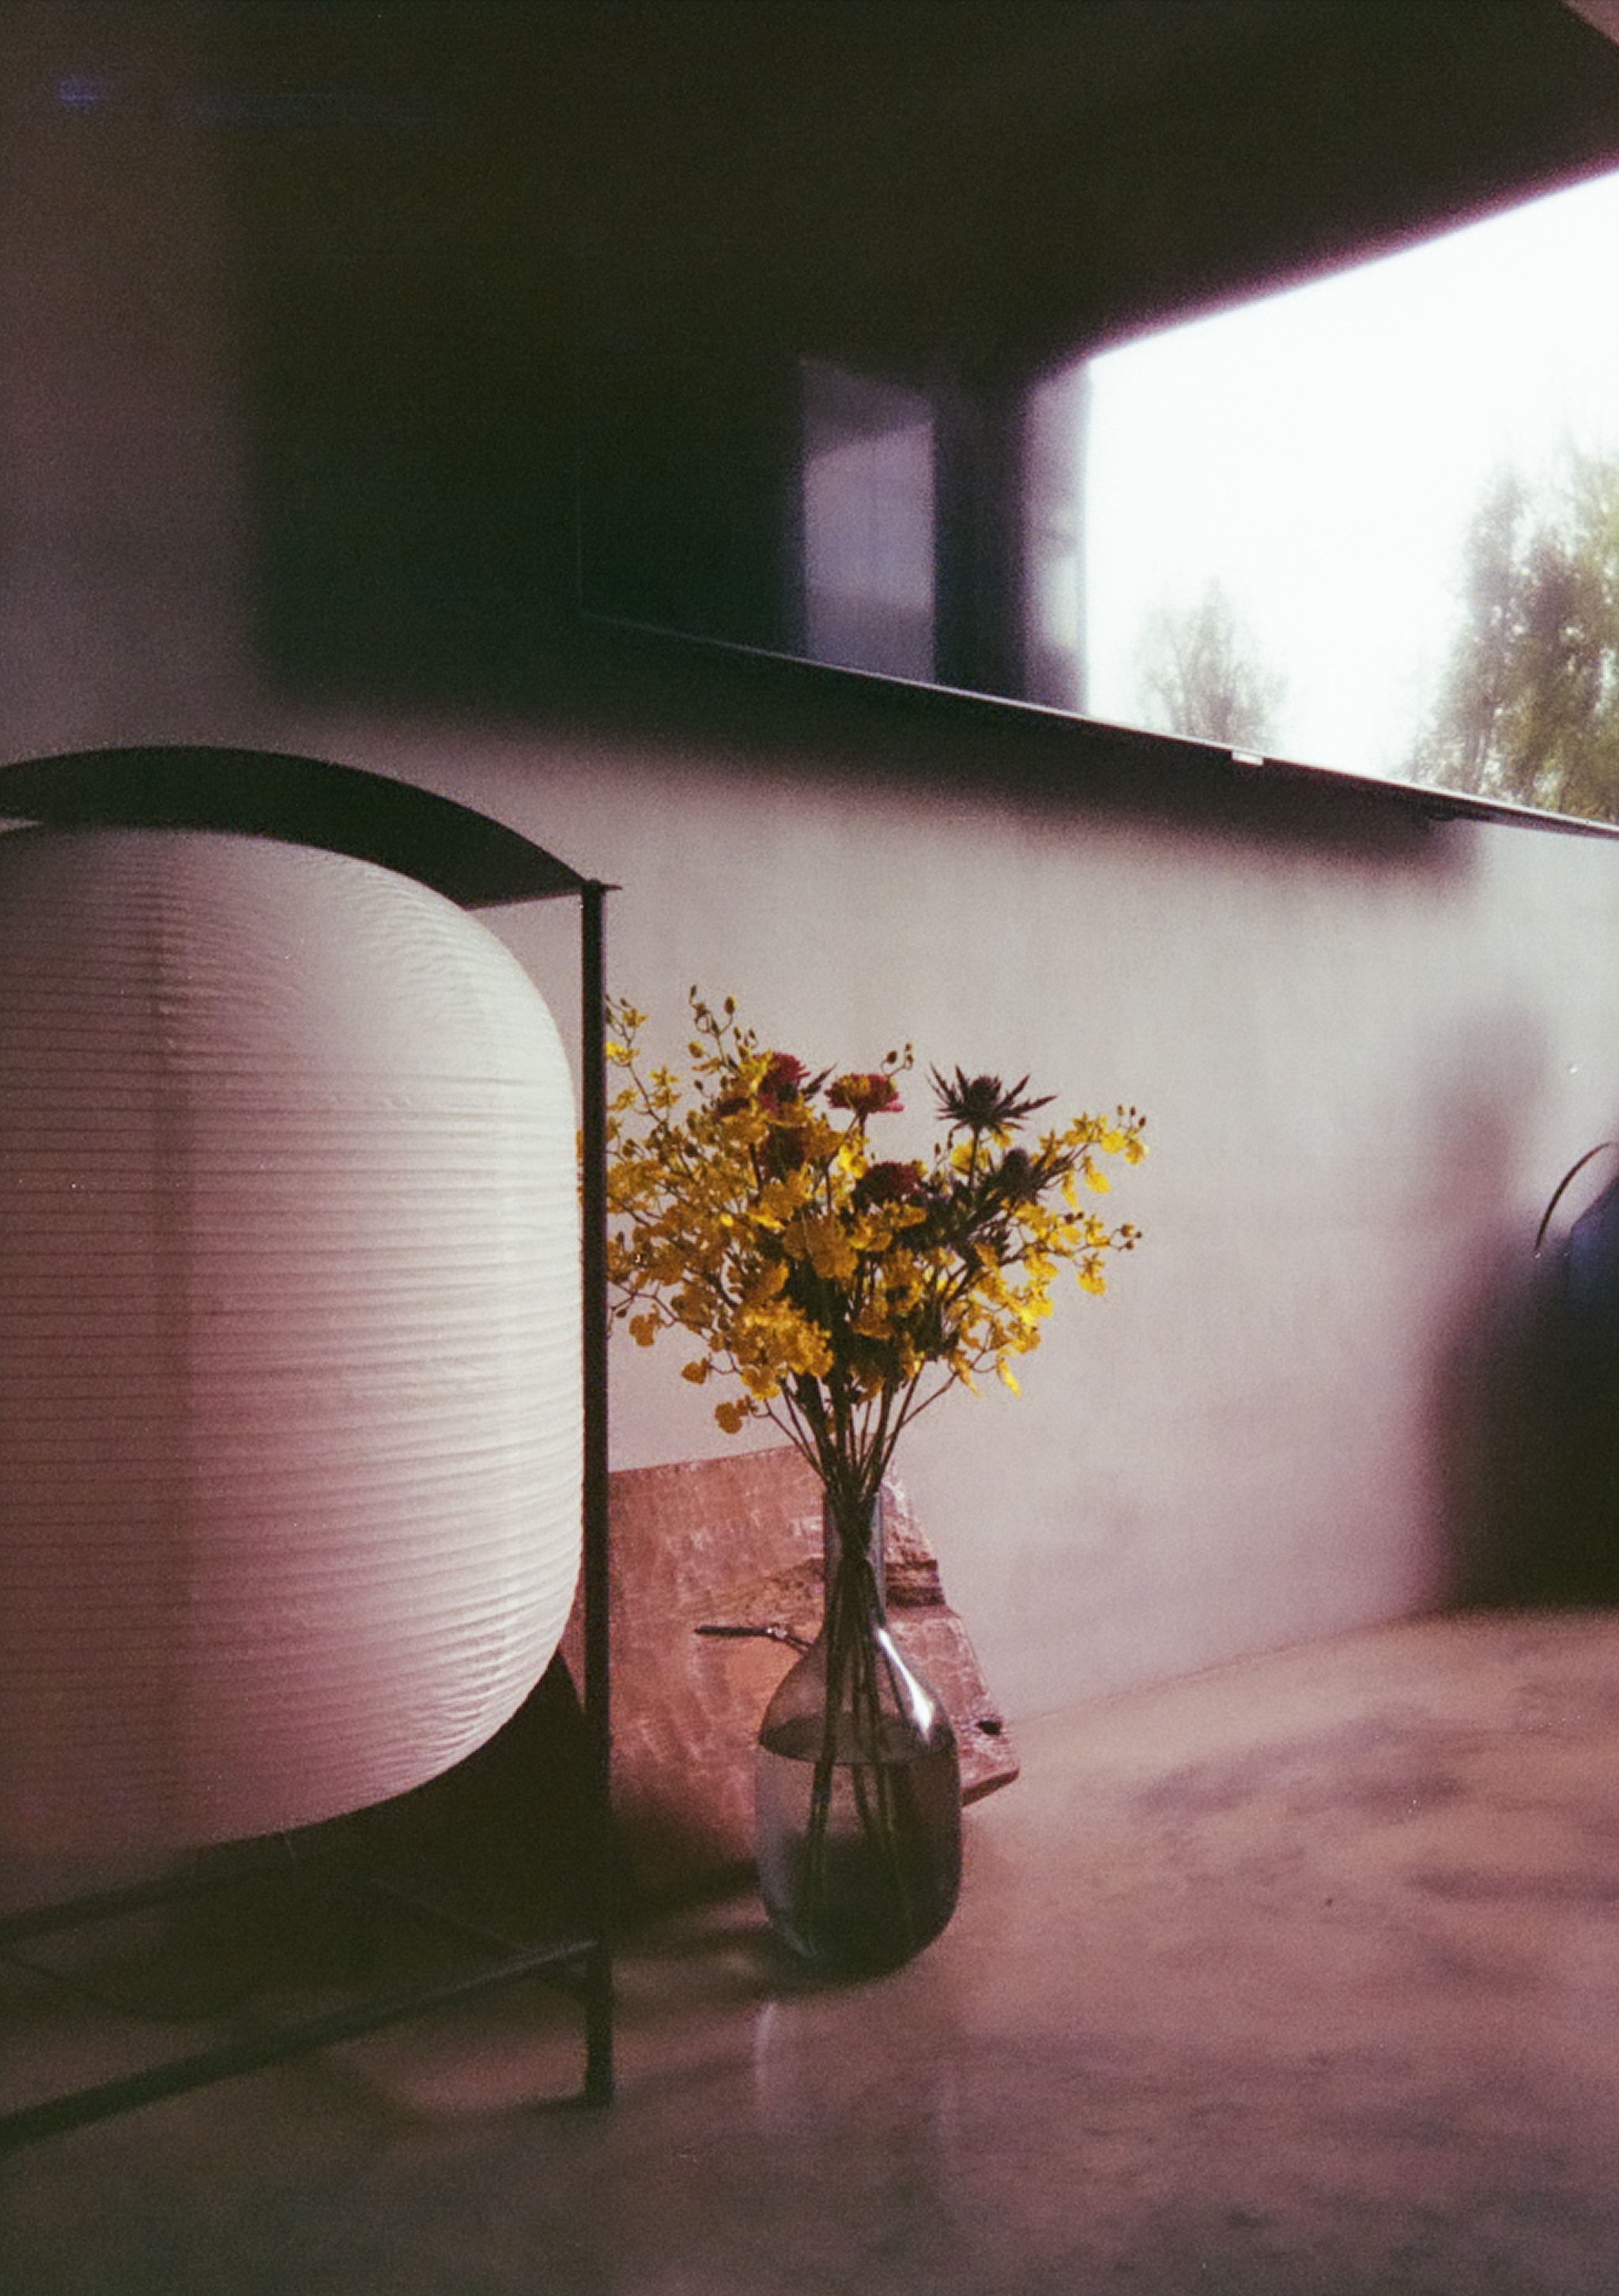 A floor lantern and a vase with yellow, purple, pink flowers. A TV on the wall.